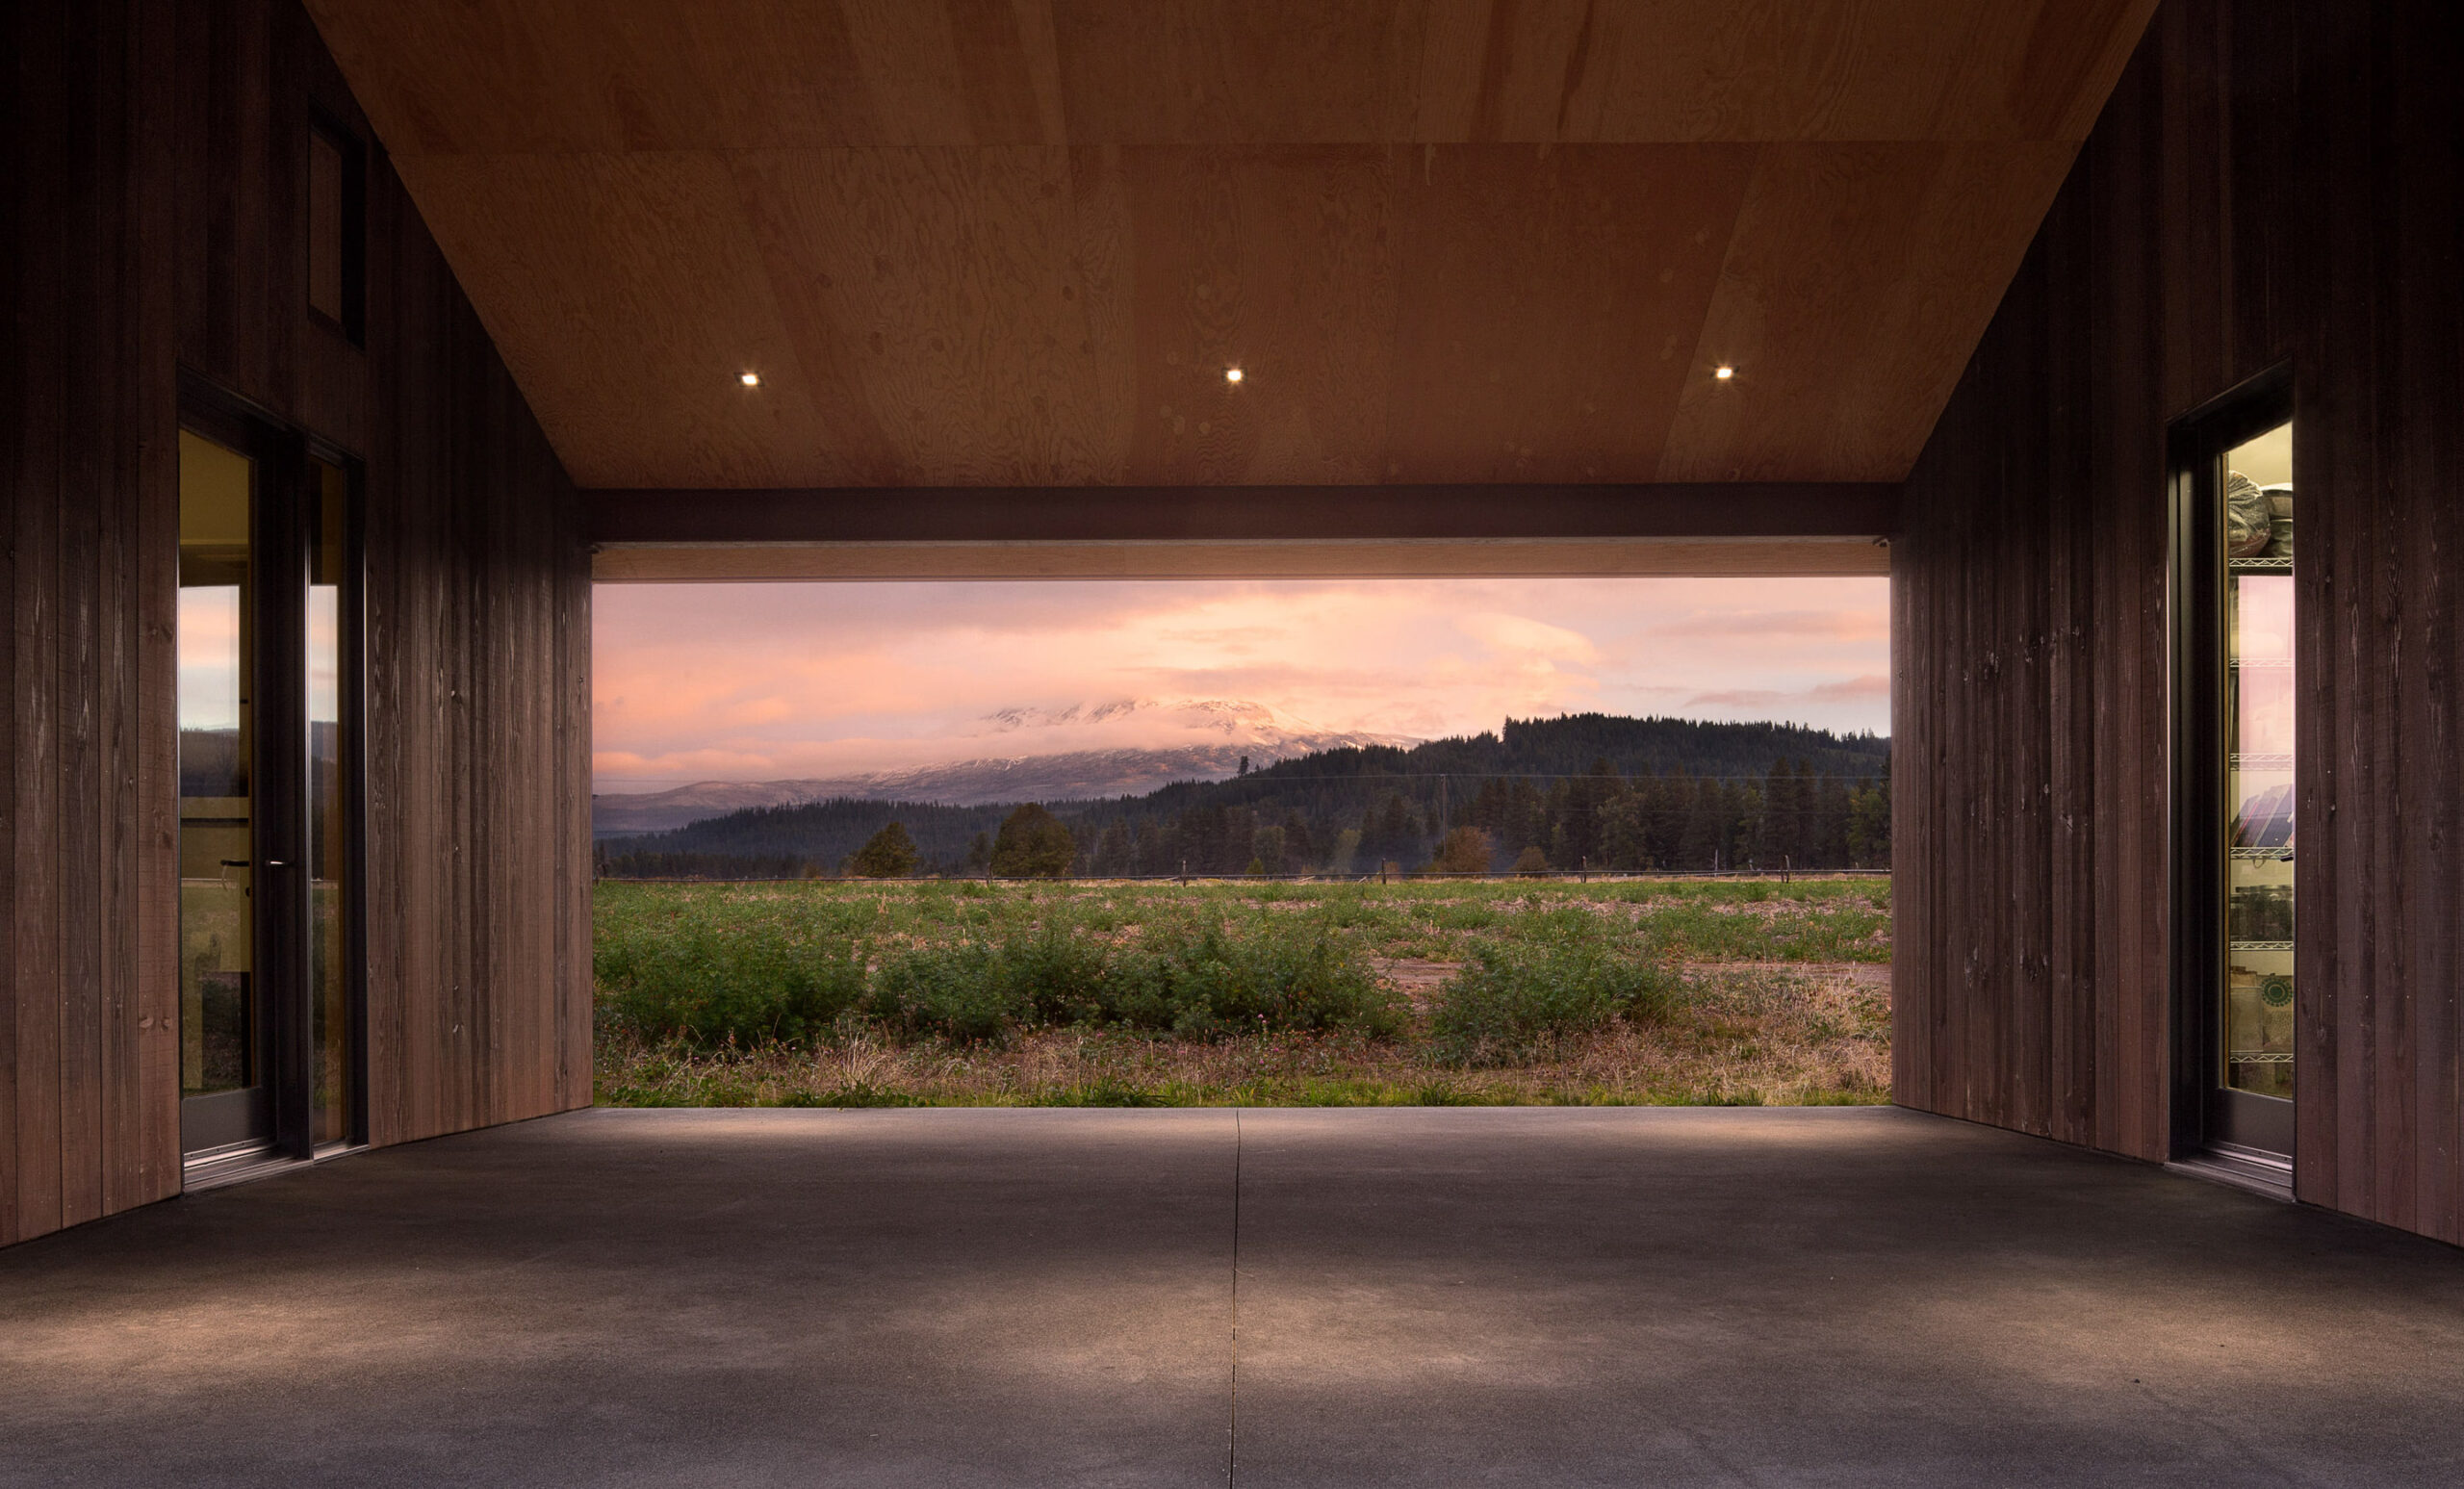 Stationær roman hastighed Olson Kundig Explores the Aesthetic of Art, Nature & Architecture